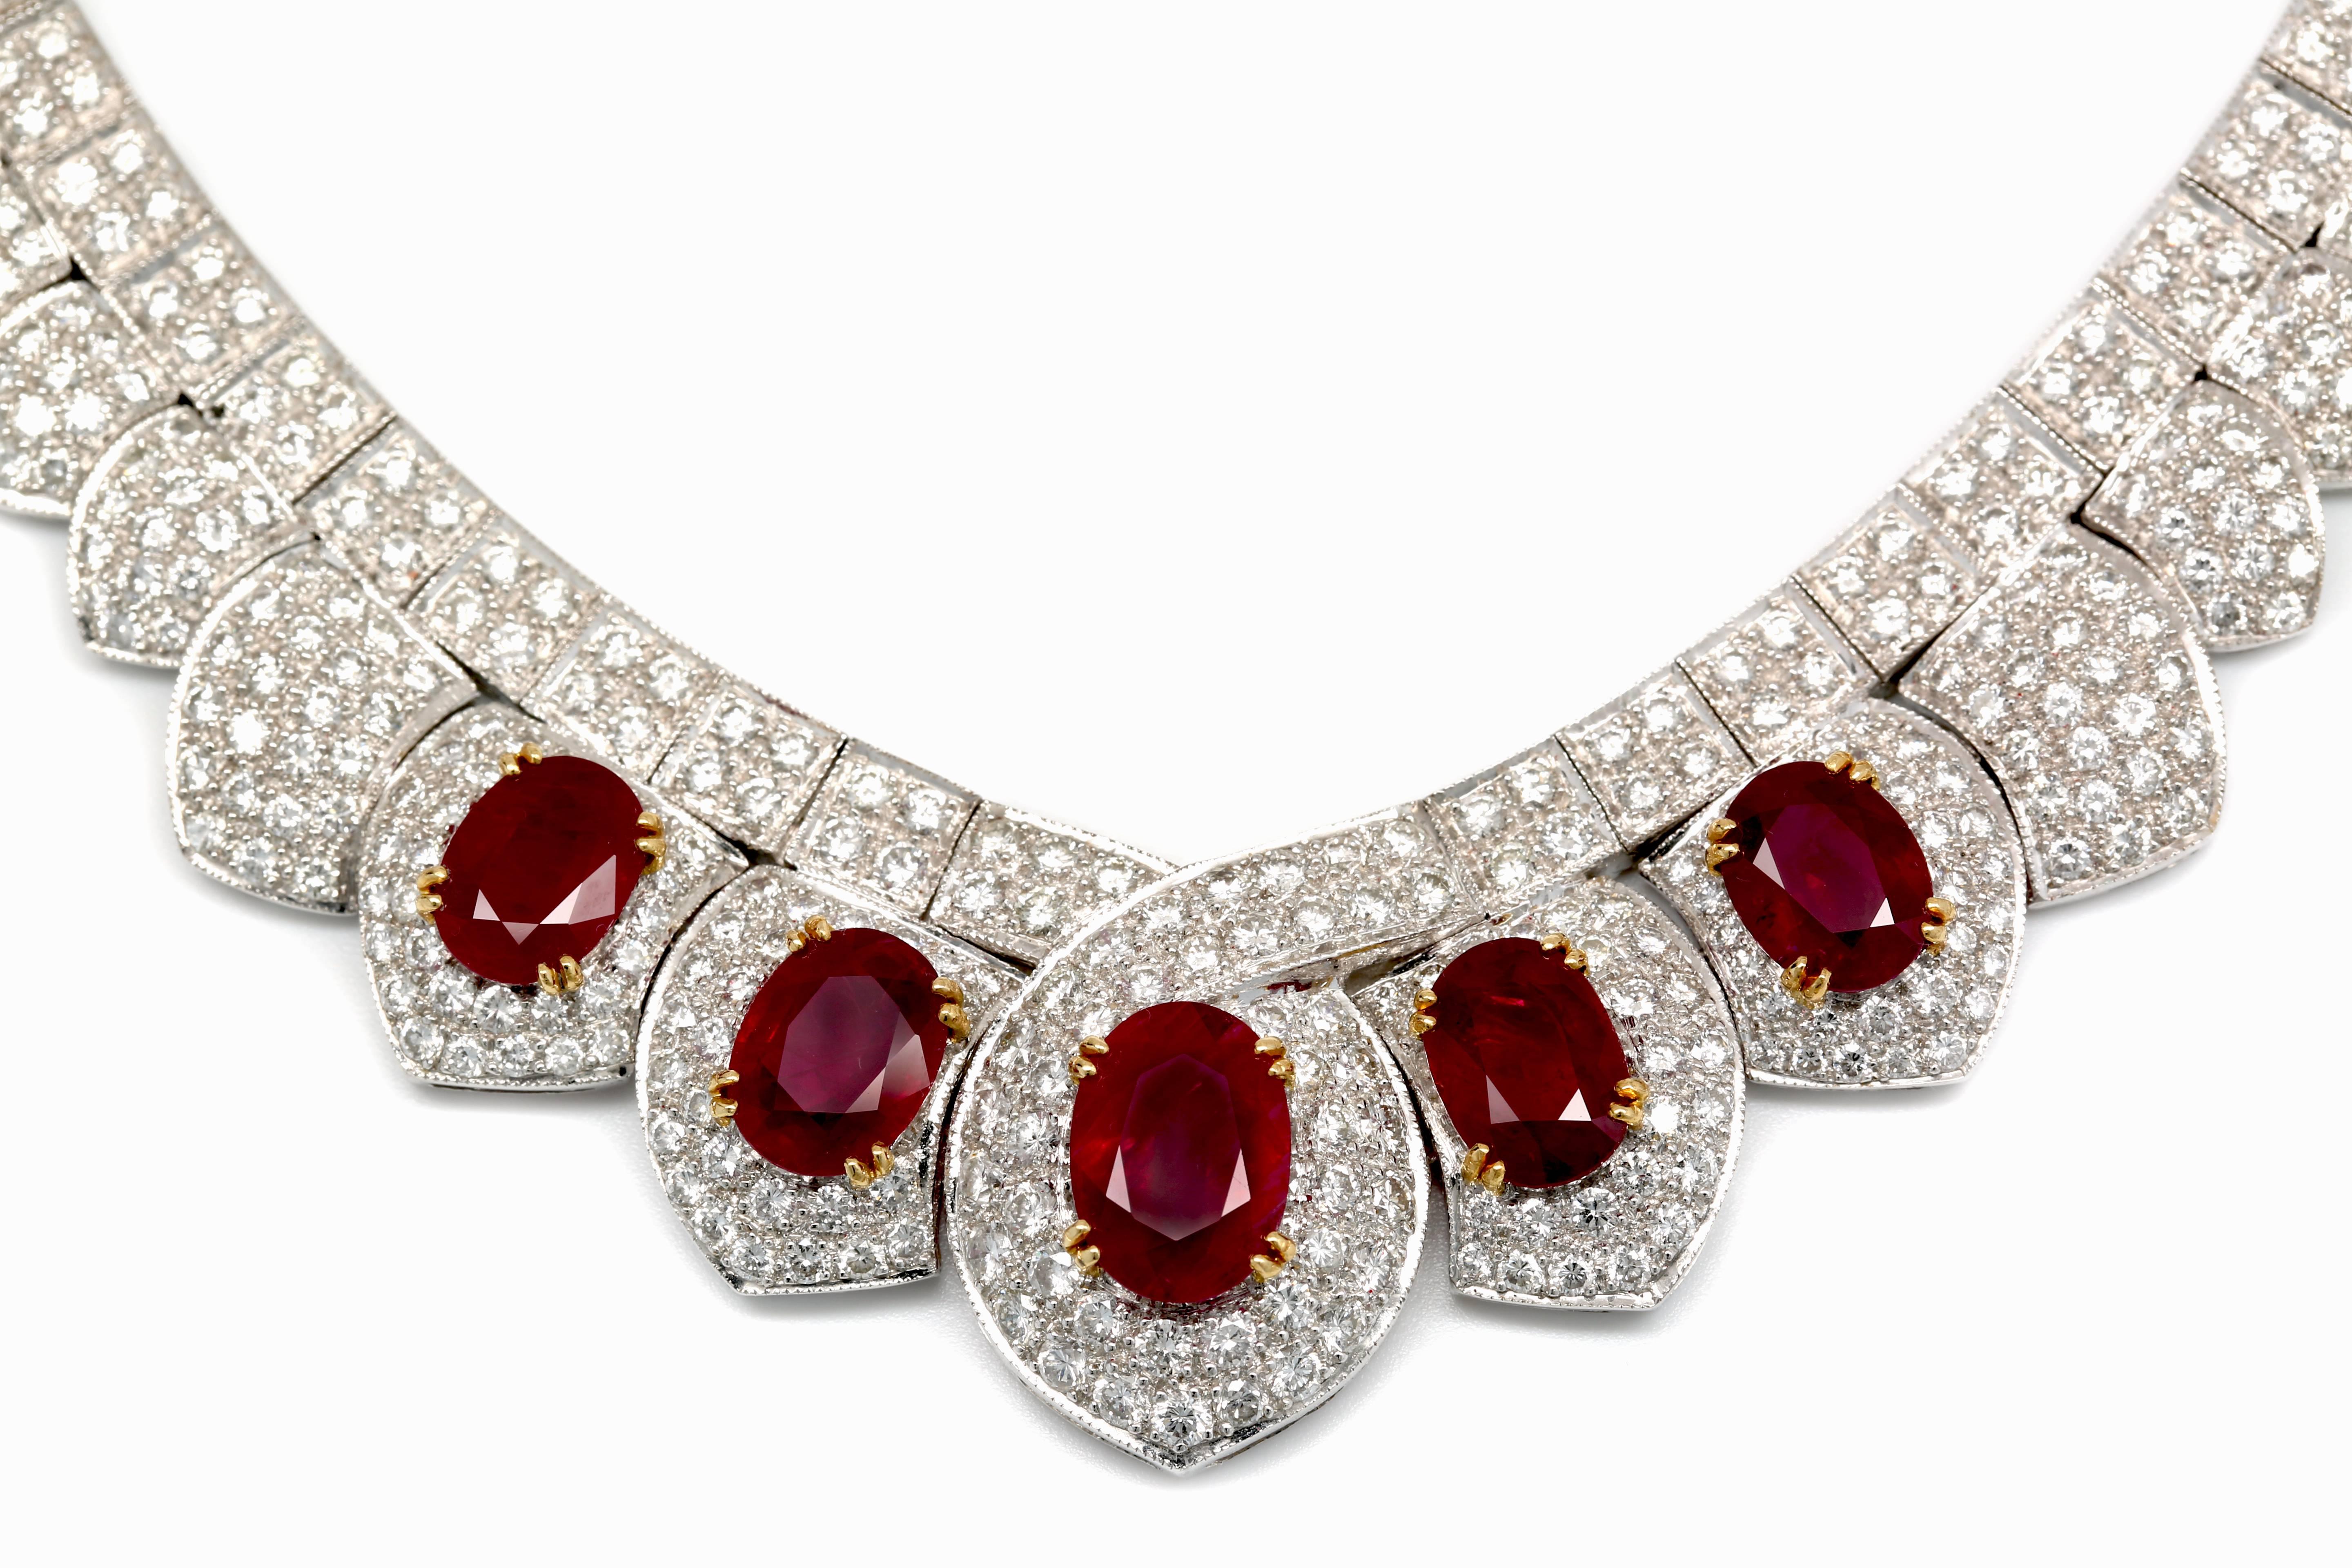 1980s Ruby and Diamond Necklace set with 25.00 Carats of Collection Quality Diamonds D-E Color VVS-VS Clarity. Featuring 5 Rubies weighing Approx. 17.00 Carats set in 18K White Gold.